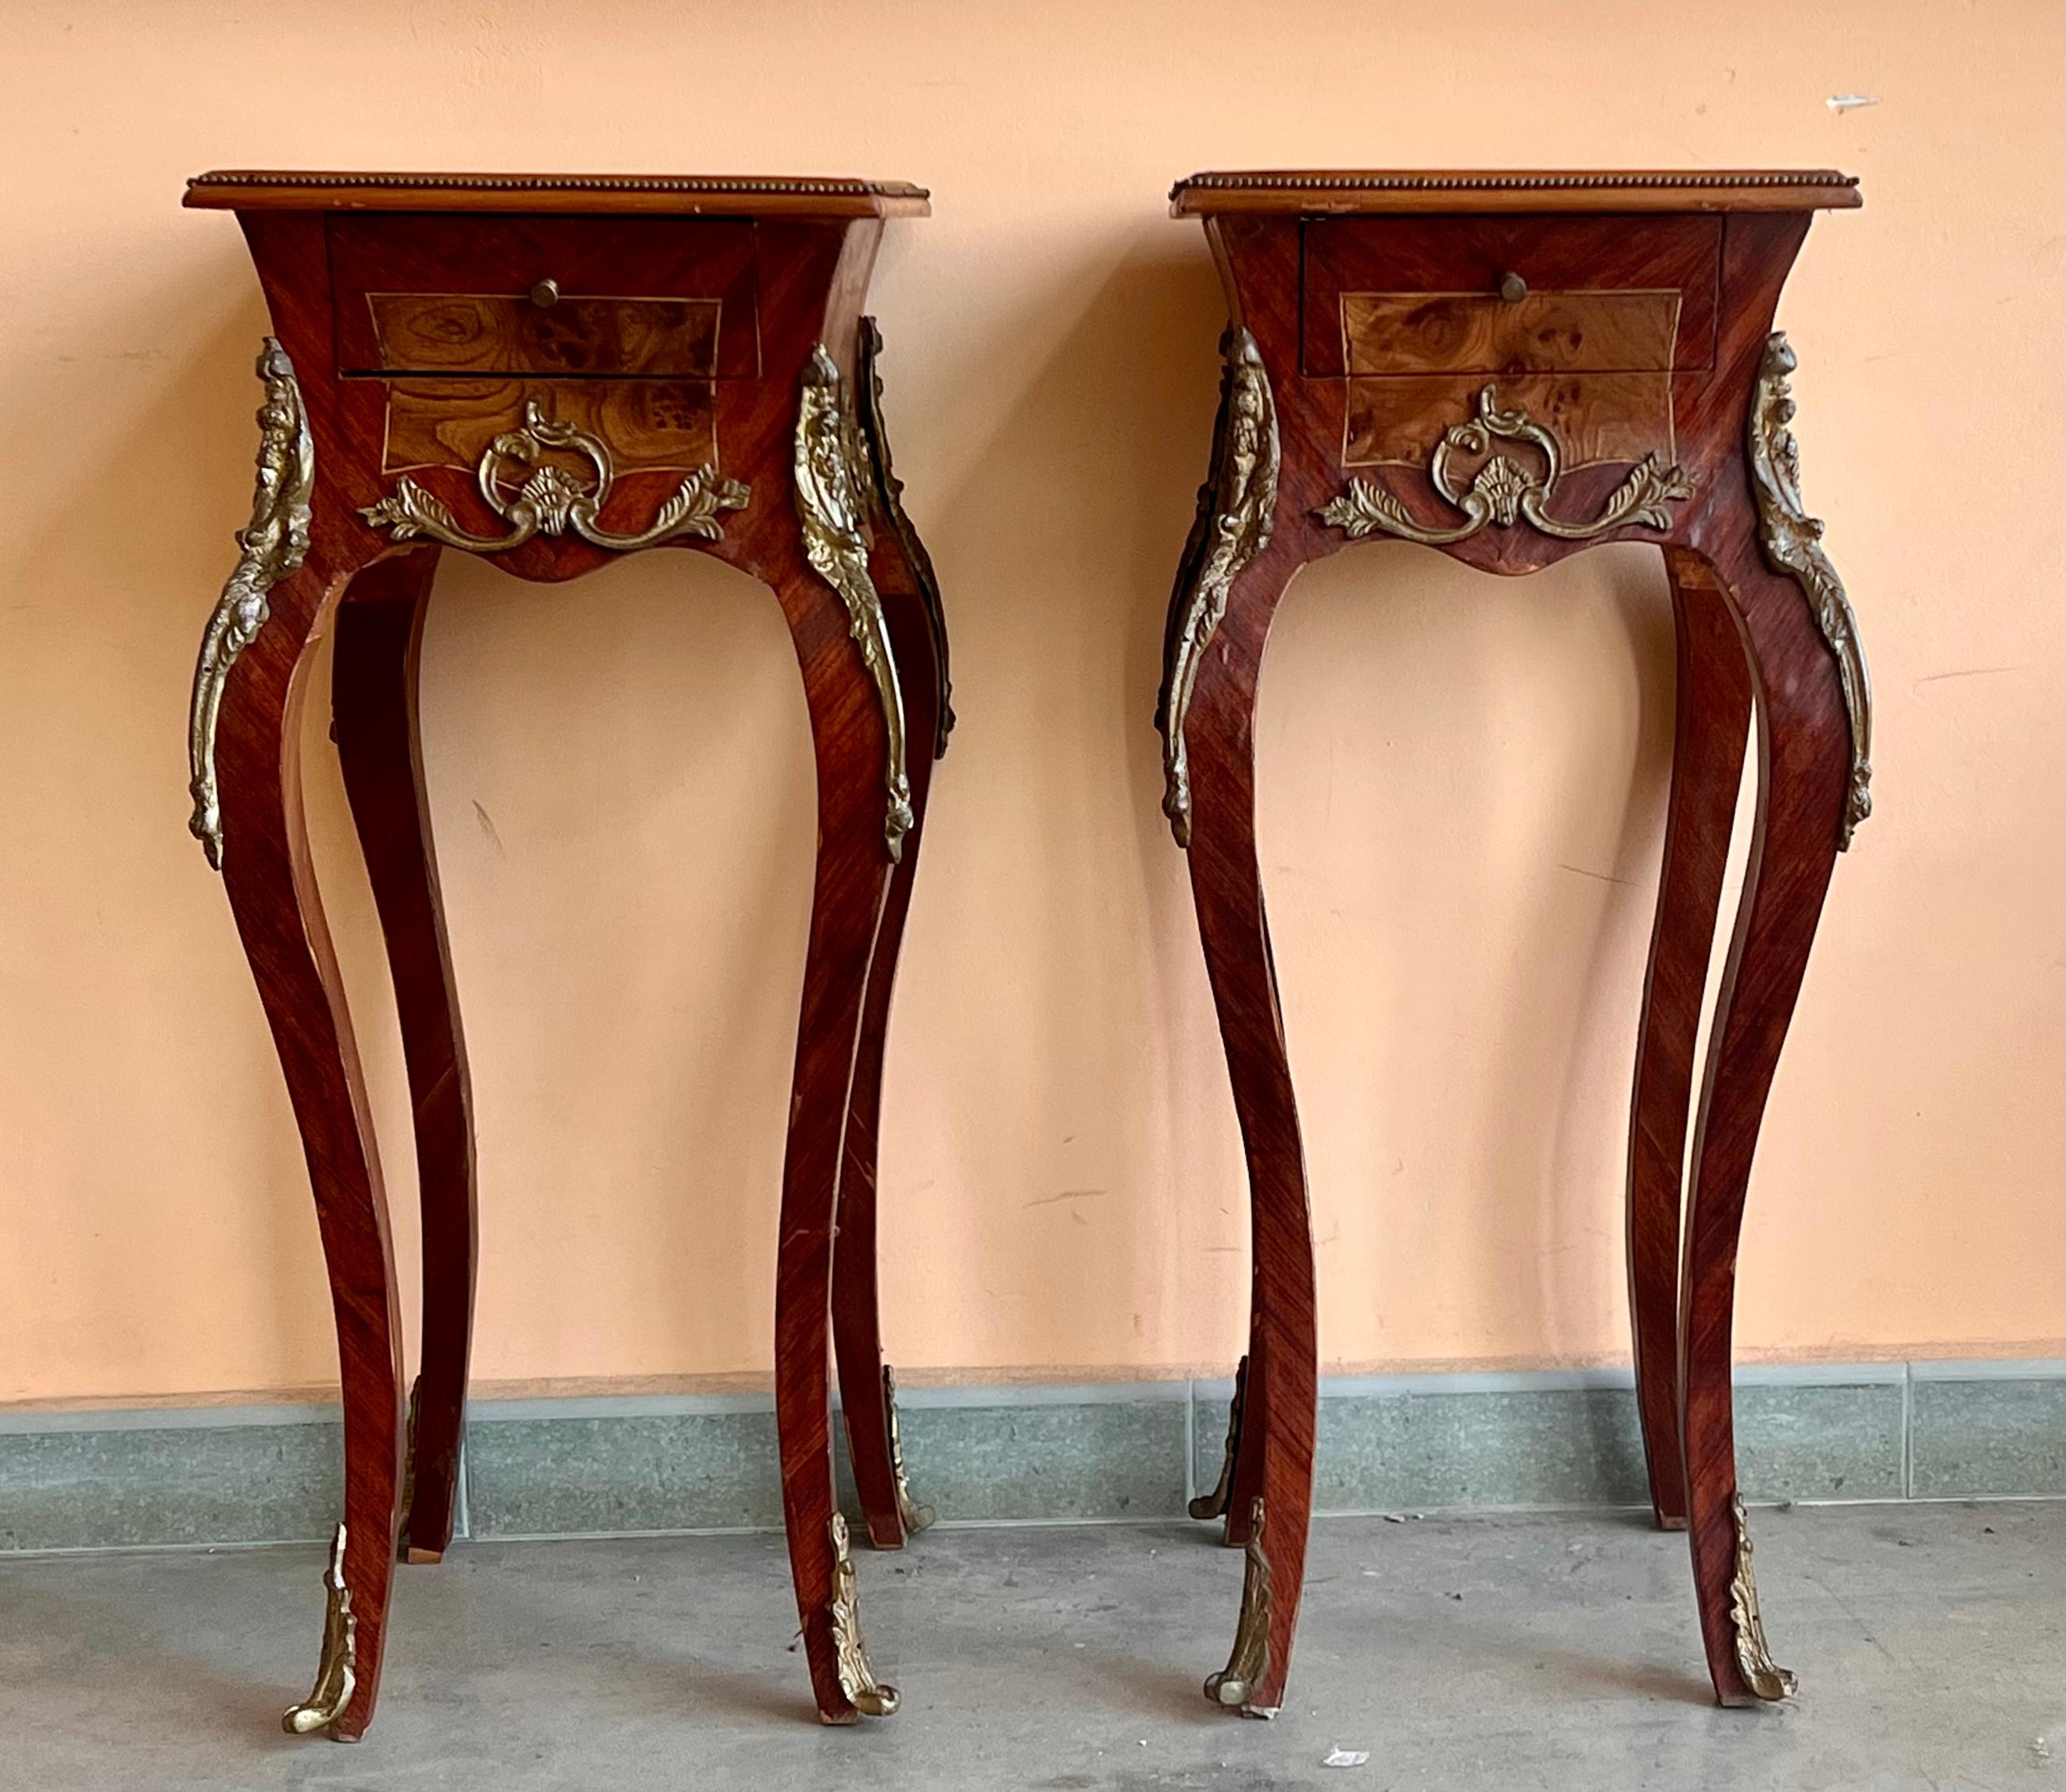 Pair of French Louis XV style nightstands with gorgeous floral and herringbone marquetry, herringbone inlaid box, gilt bronze mounts, one drawer with original bronze pulls and elegant legs with French kickstands and bronze trim.